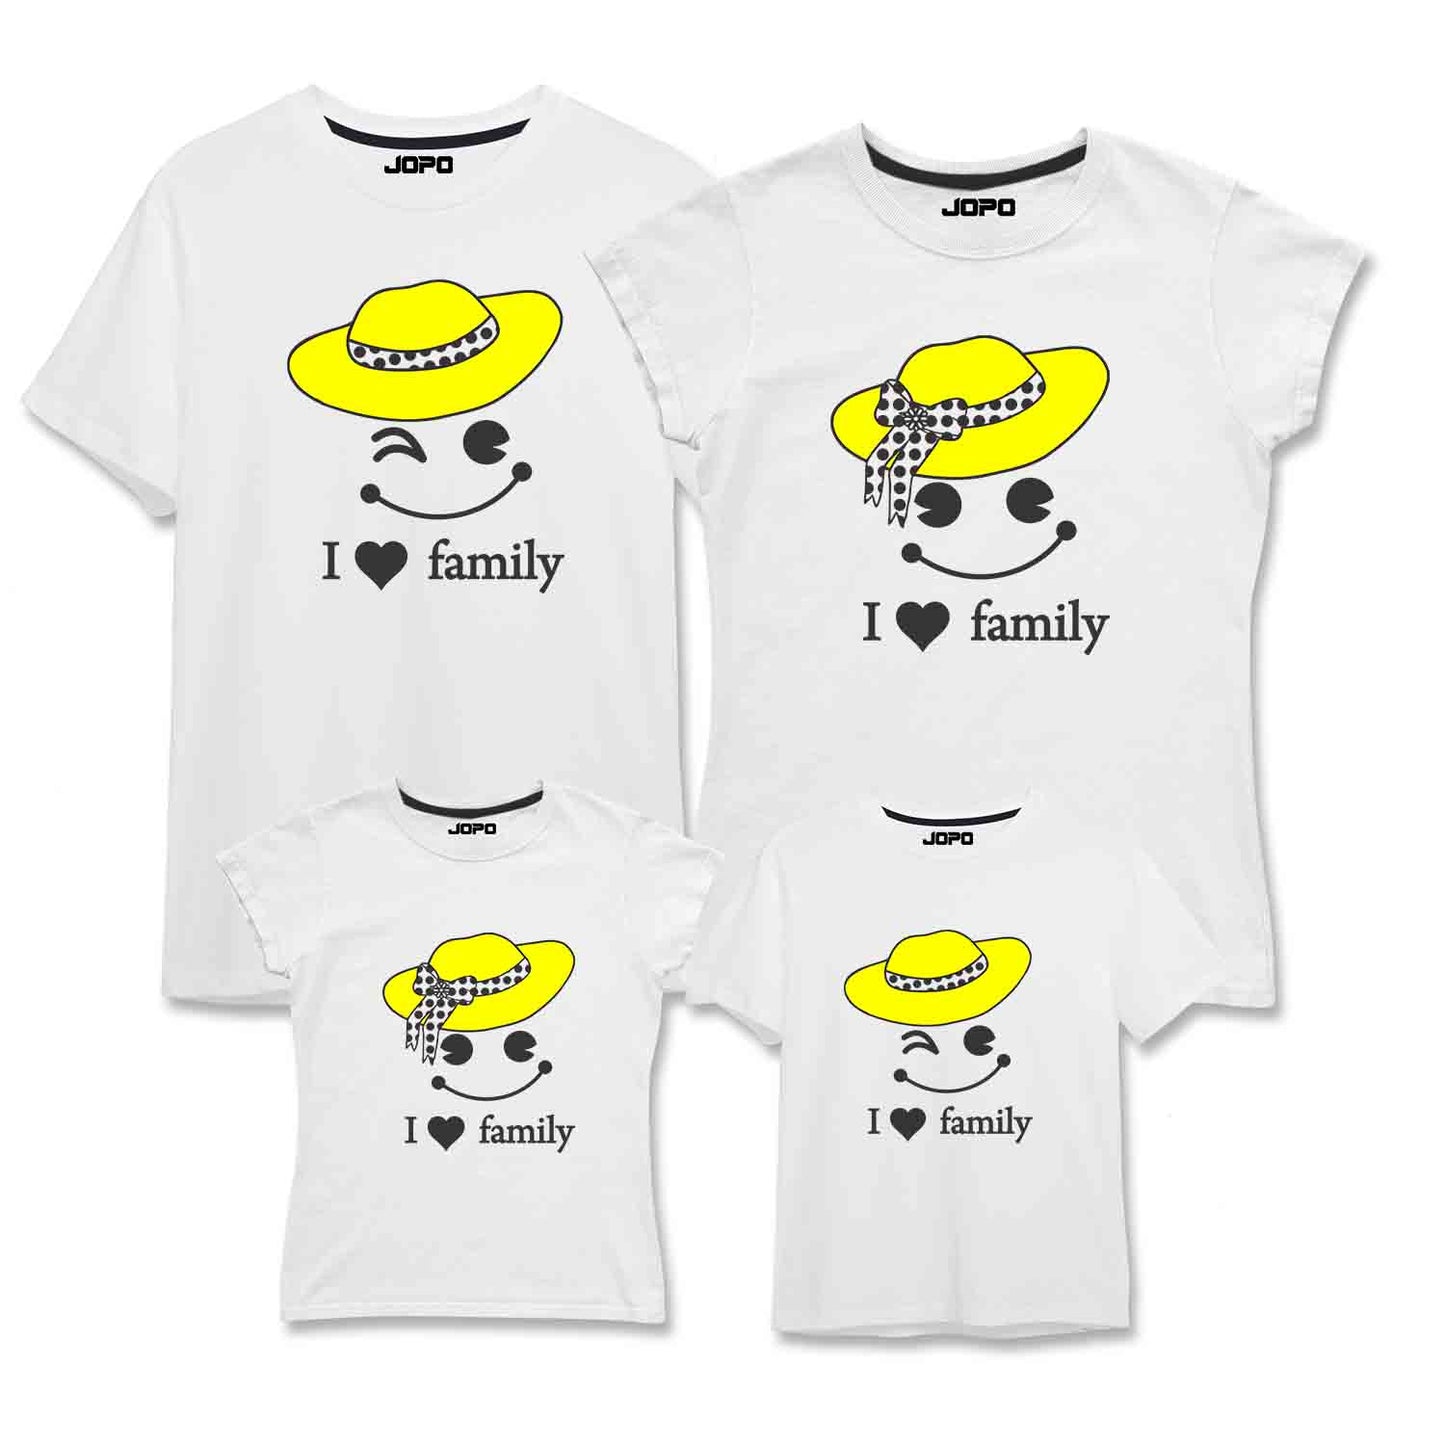 I Love Family Matching Family T-Shirts Set of 3 & 4 for Mom, Dad, Son and Daughter